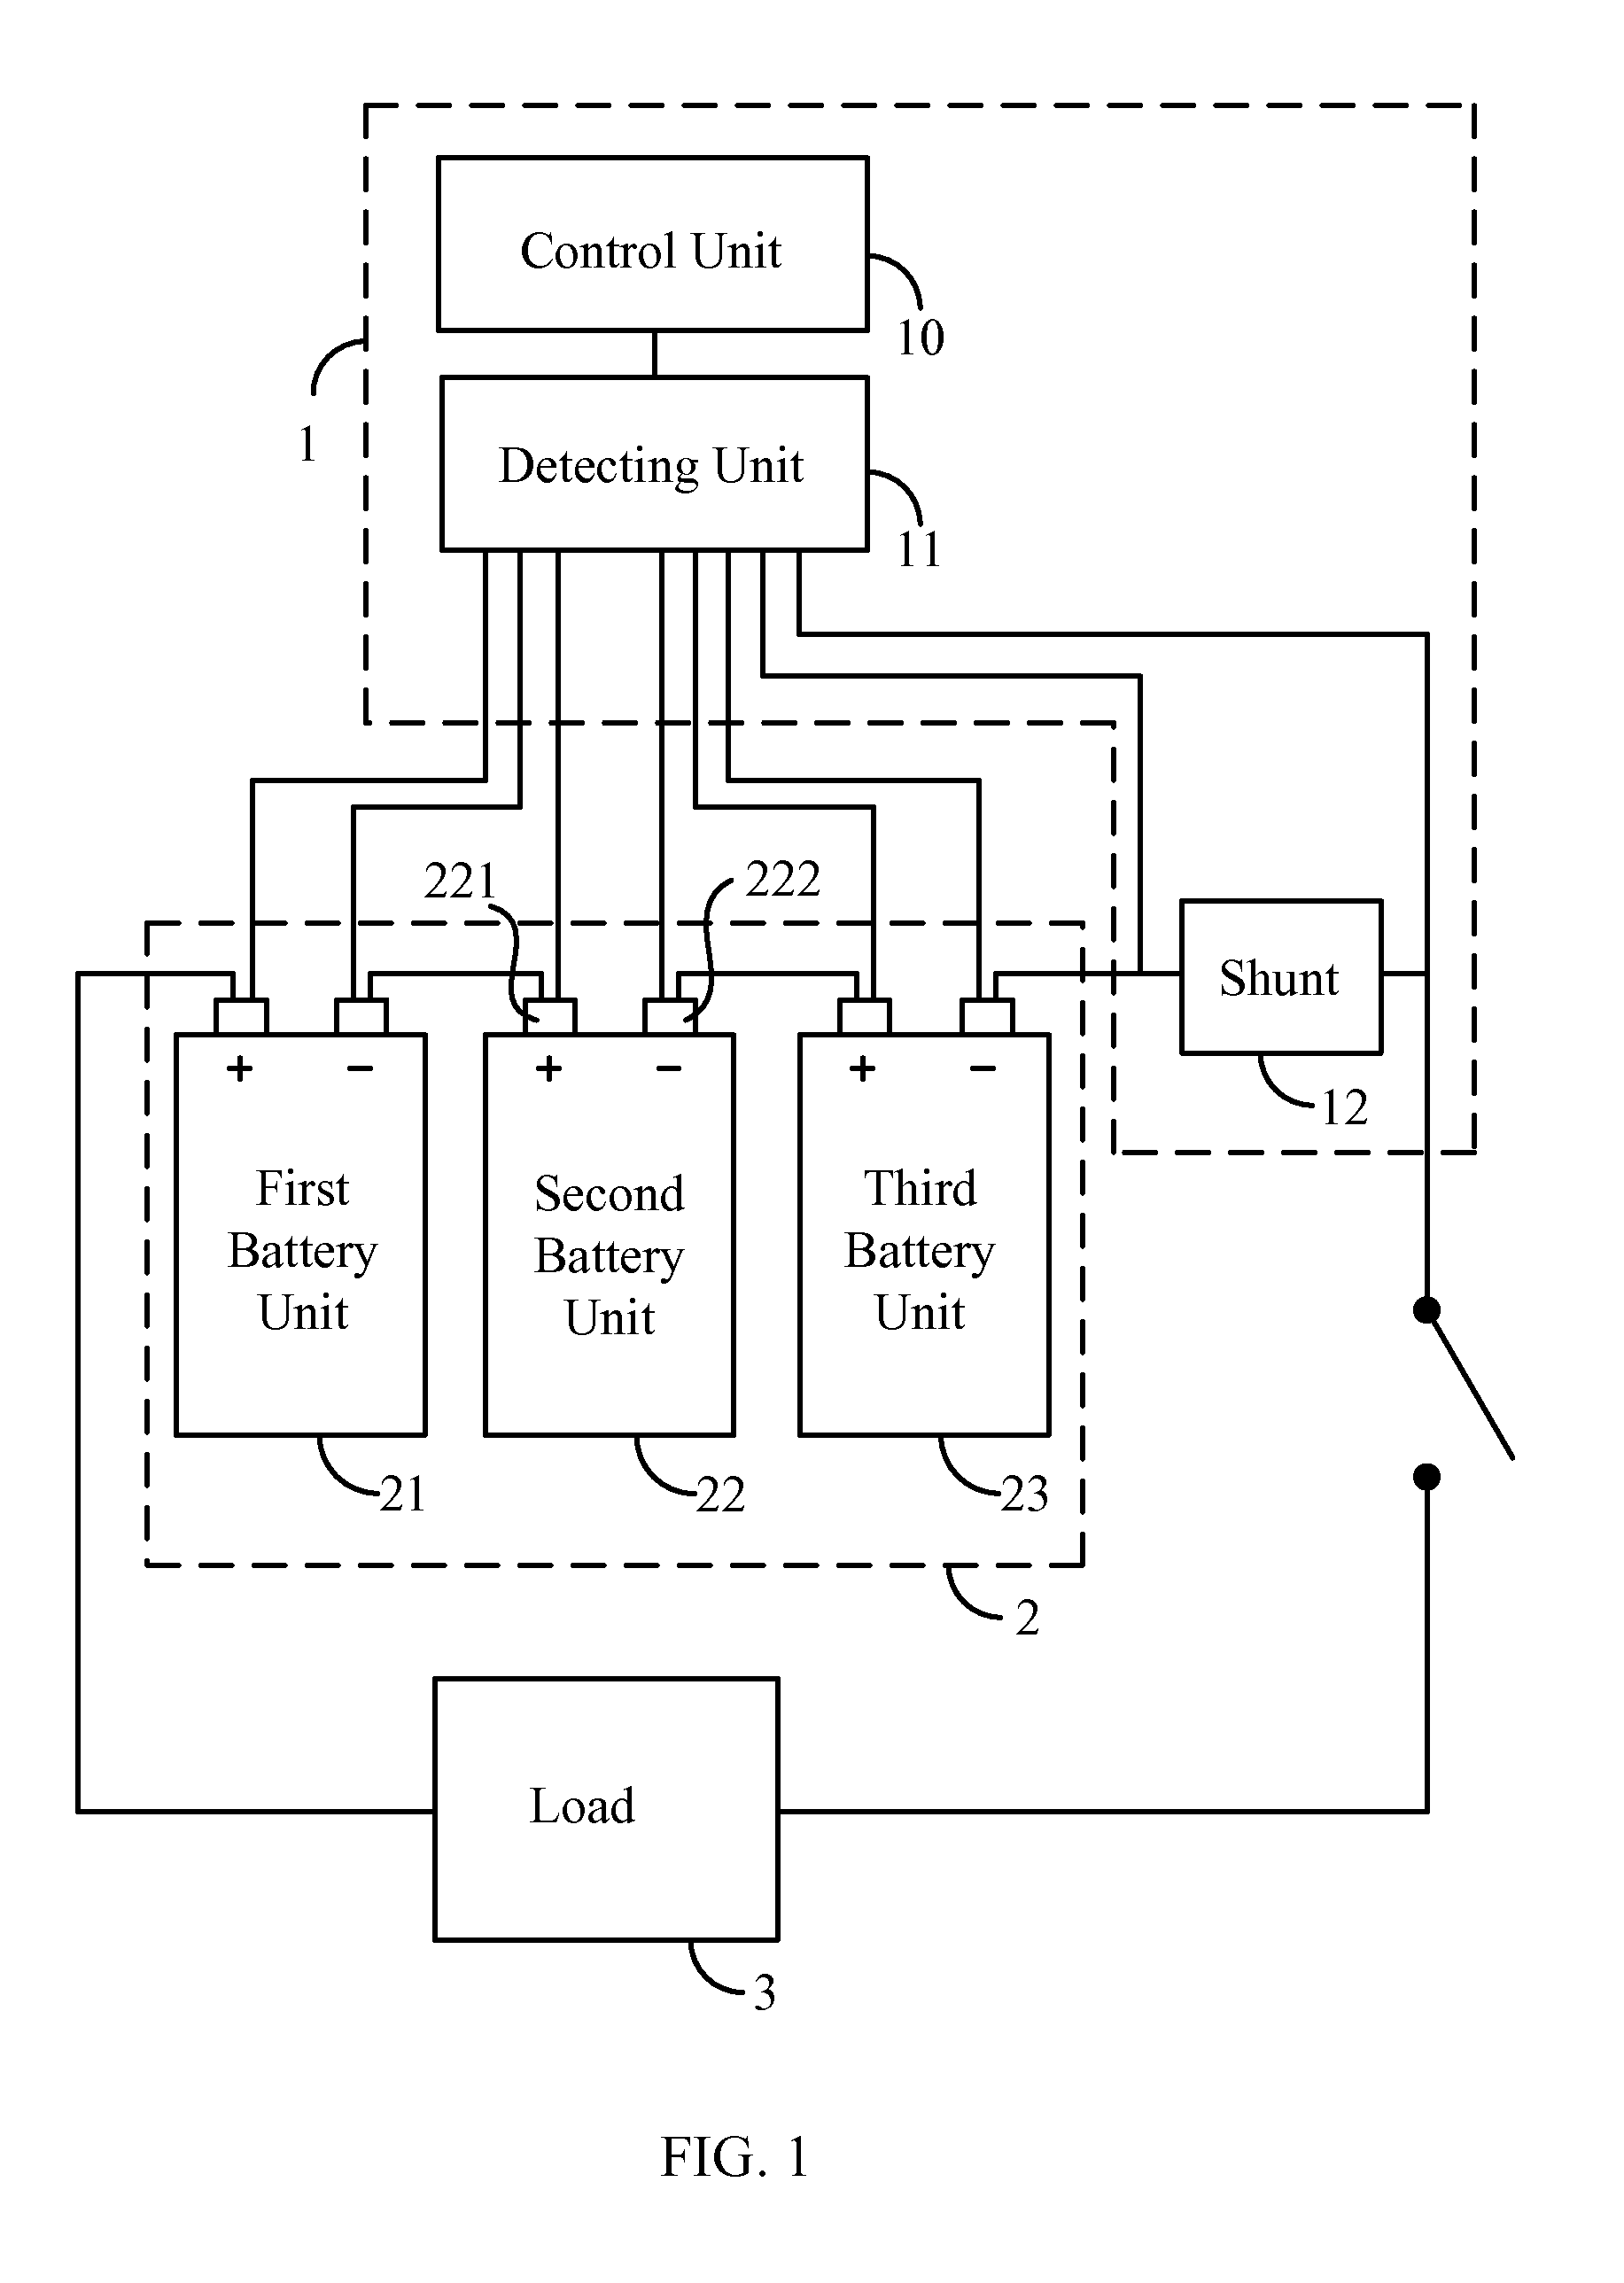 Battery module state detection method